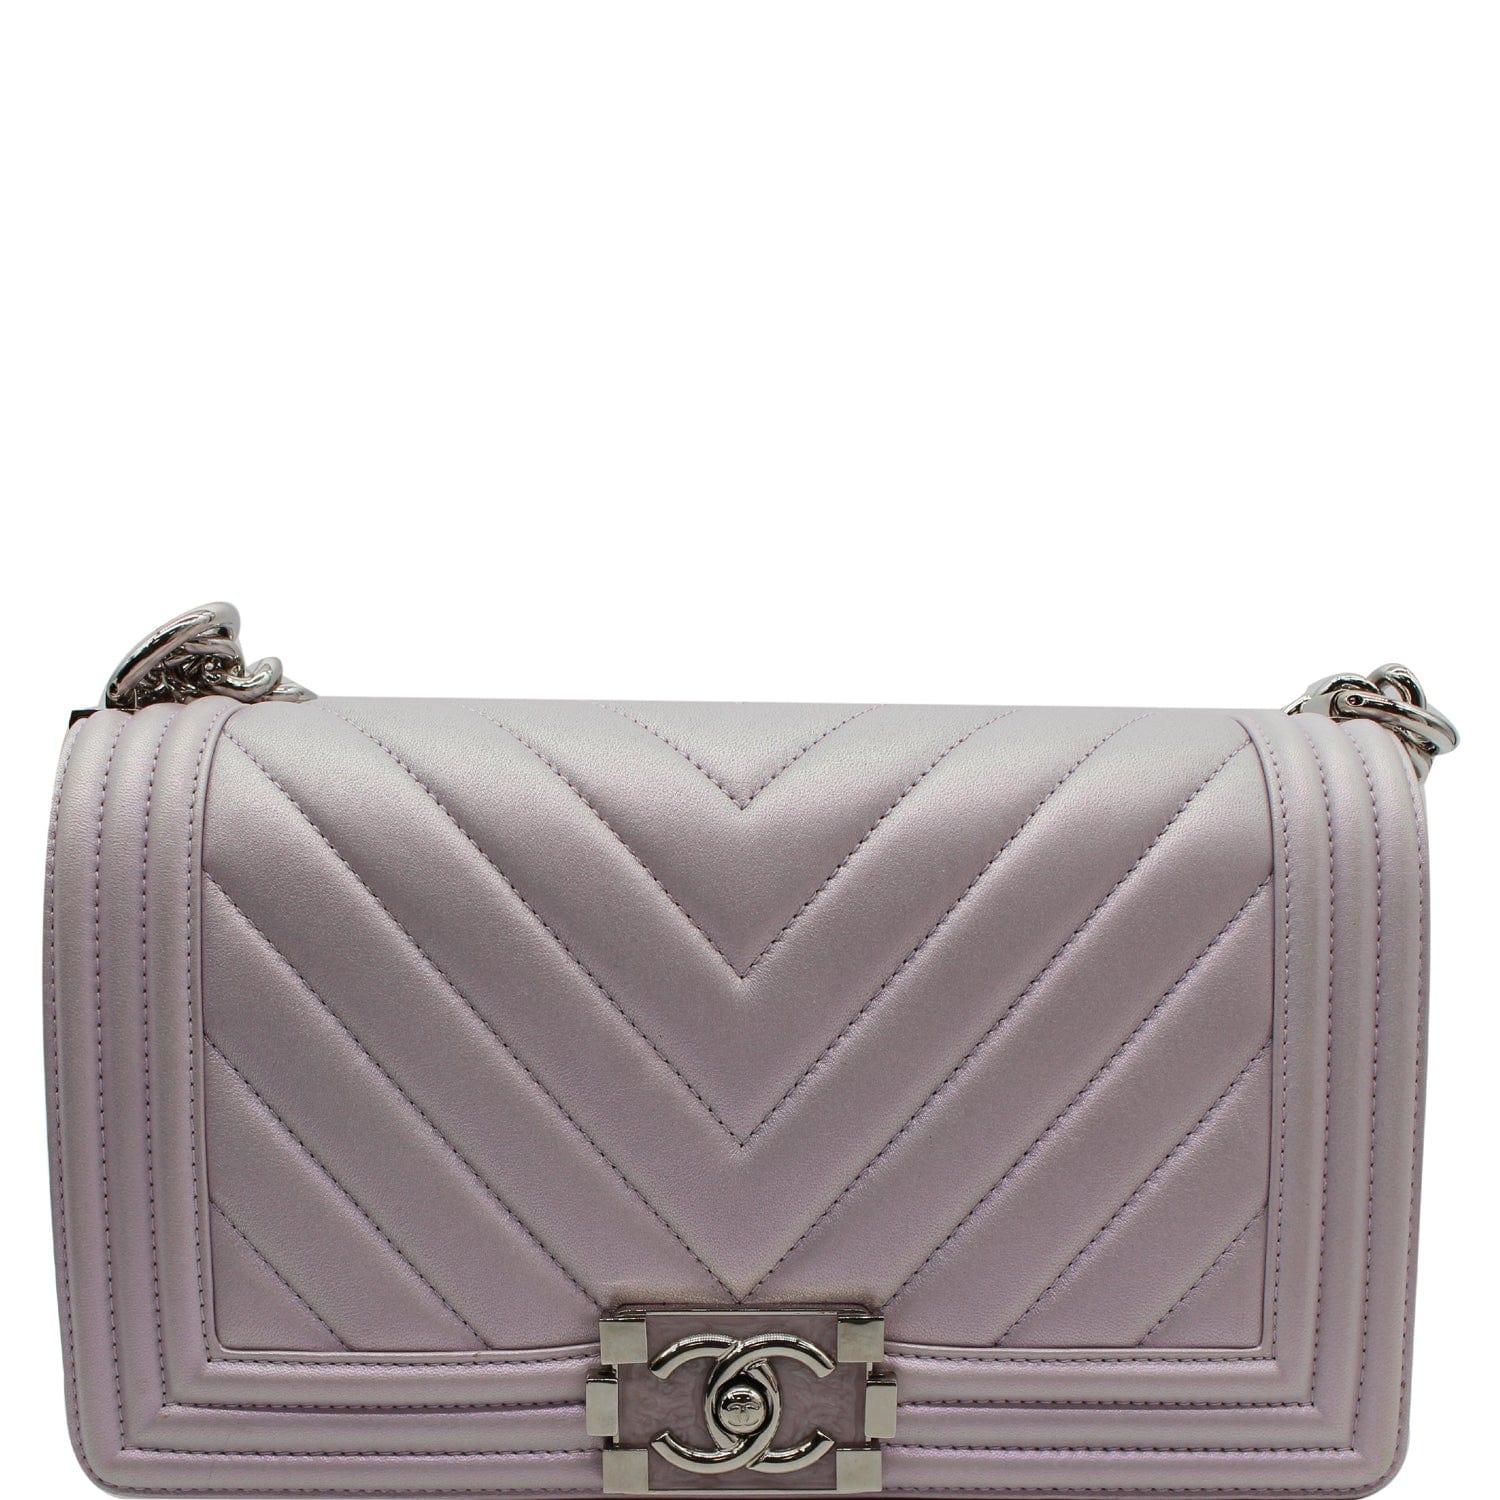 CHANEL Tweed Mixed Fibers Quilted Medium Chanel 19 Flap Lilac 932388